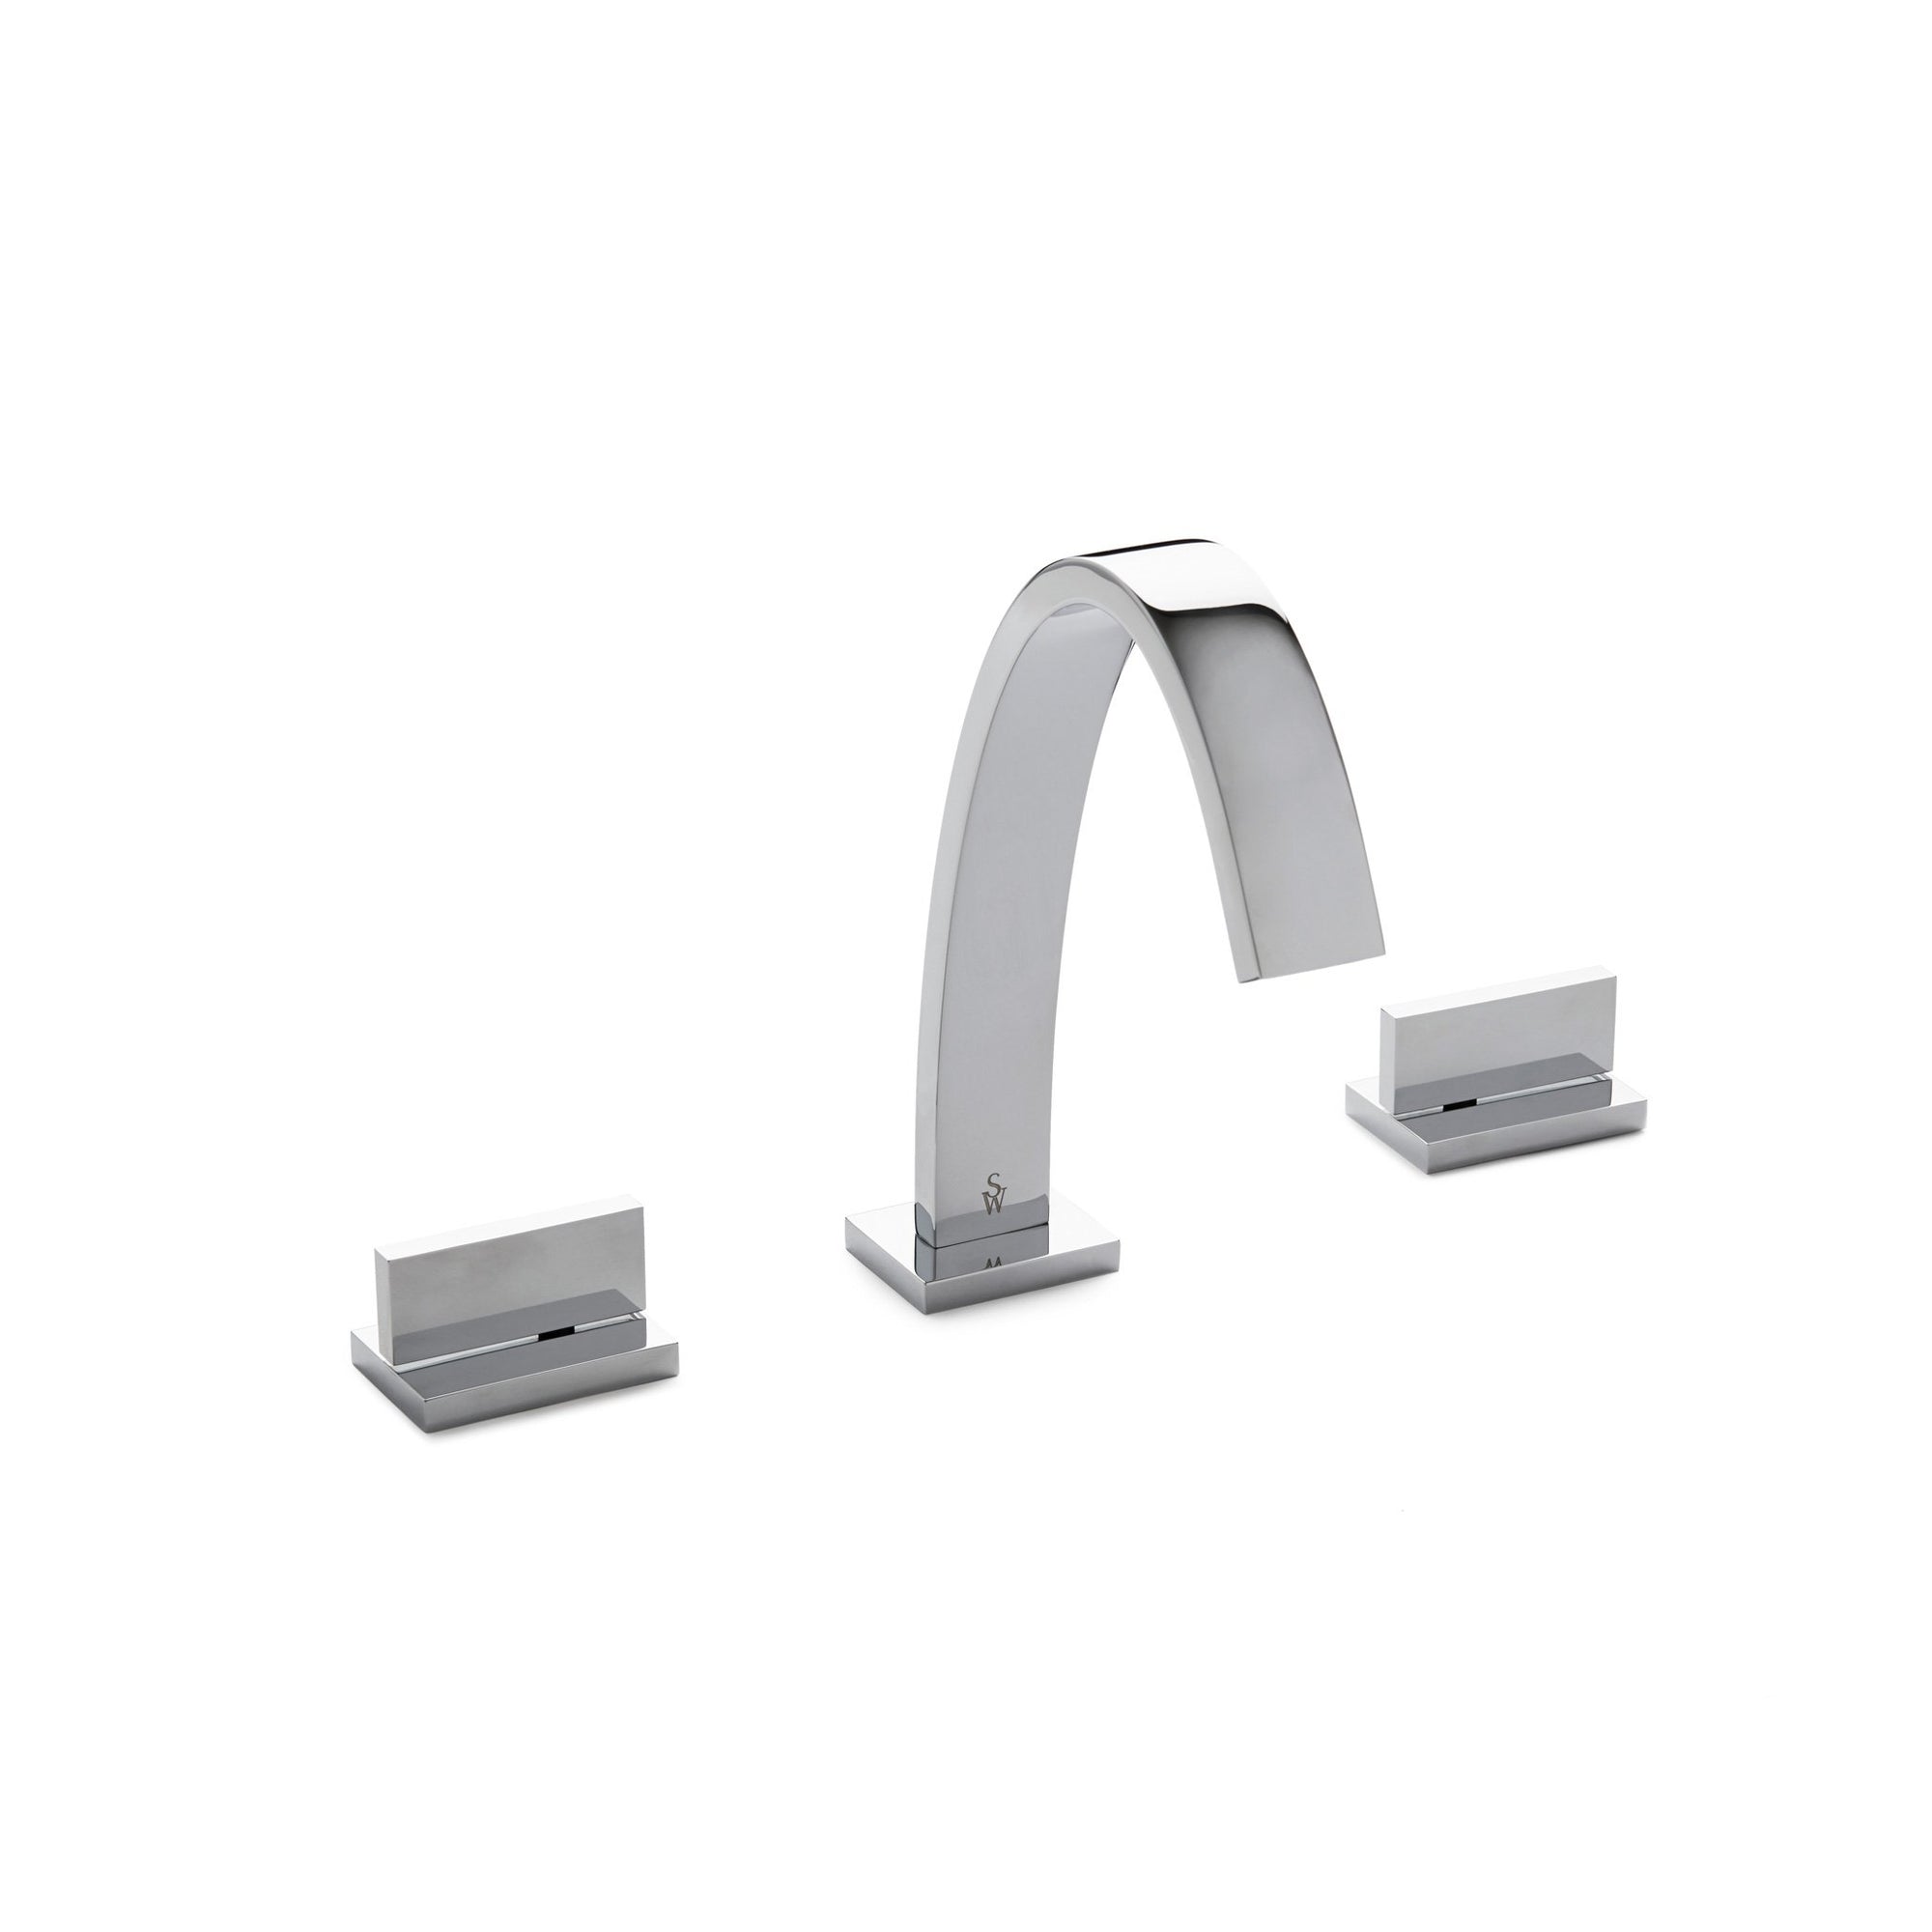 001BSN102-CP Sherle Wagner International Aqueduct with Aqueduct Lever Faucet Set in Polished Chrome metal finish